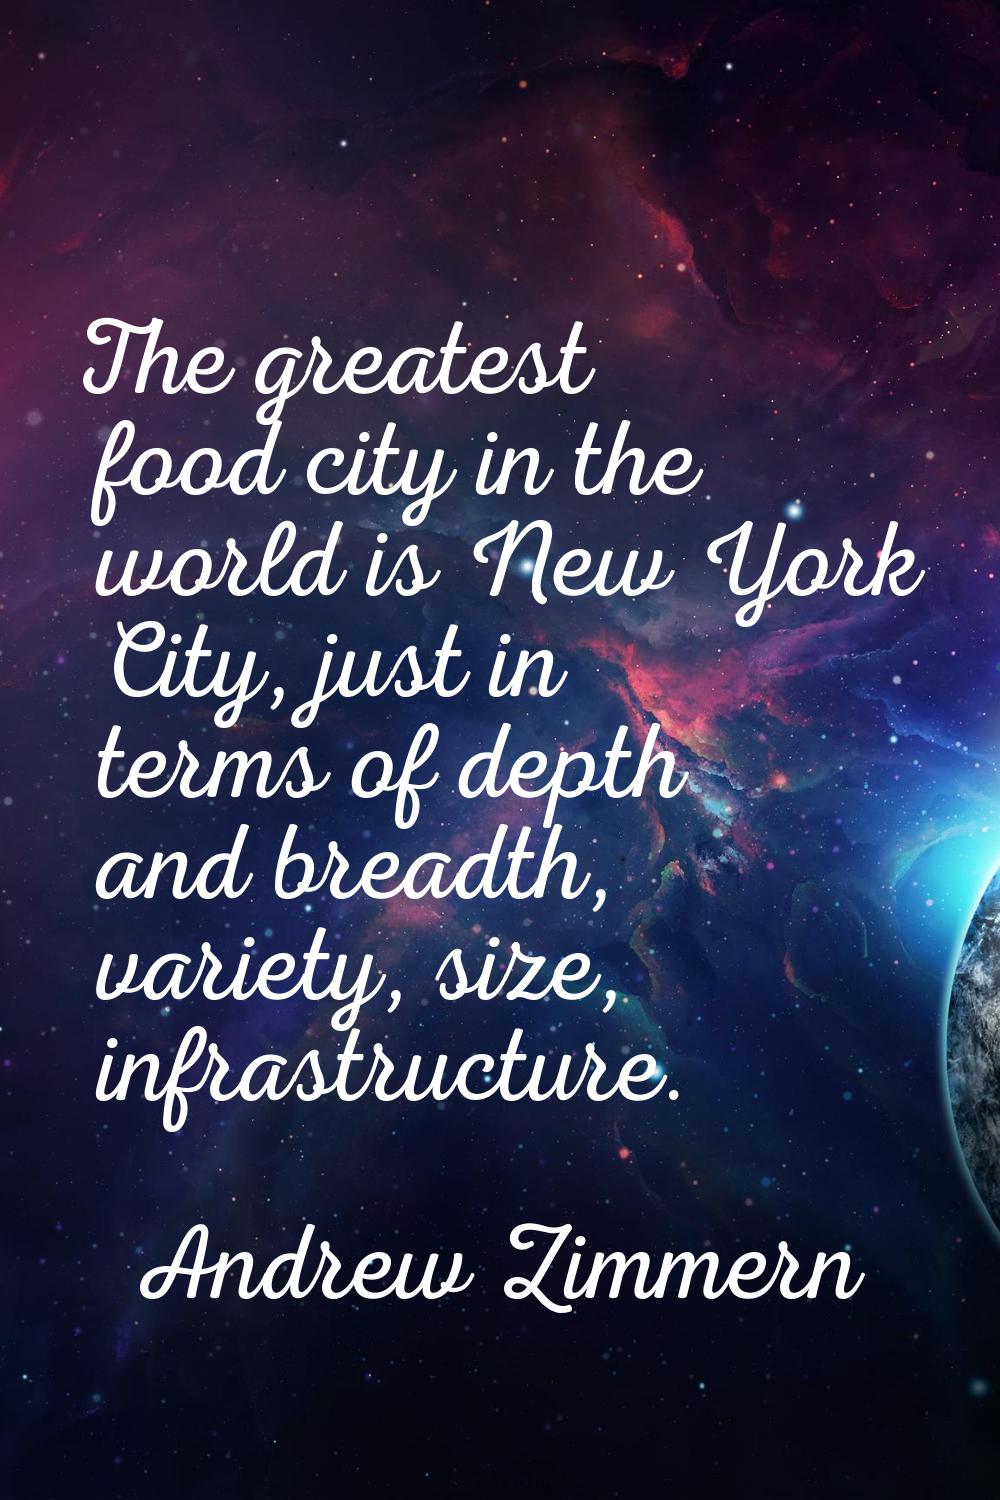 The greatest food city in the world is New York City, just in terms of depth and breadth, variety, 